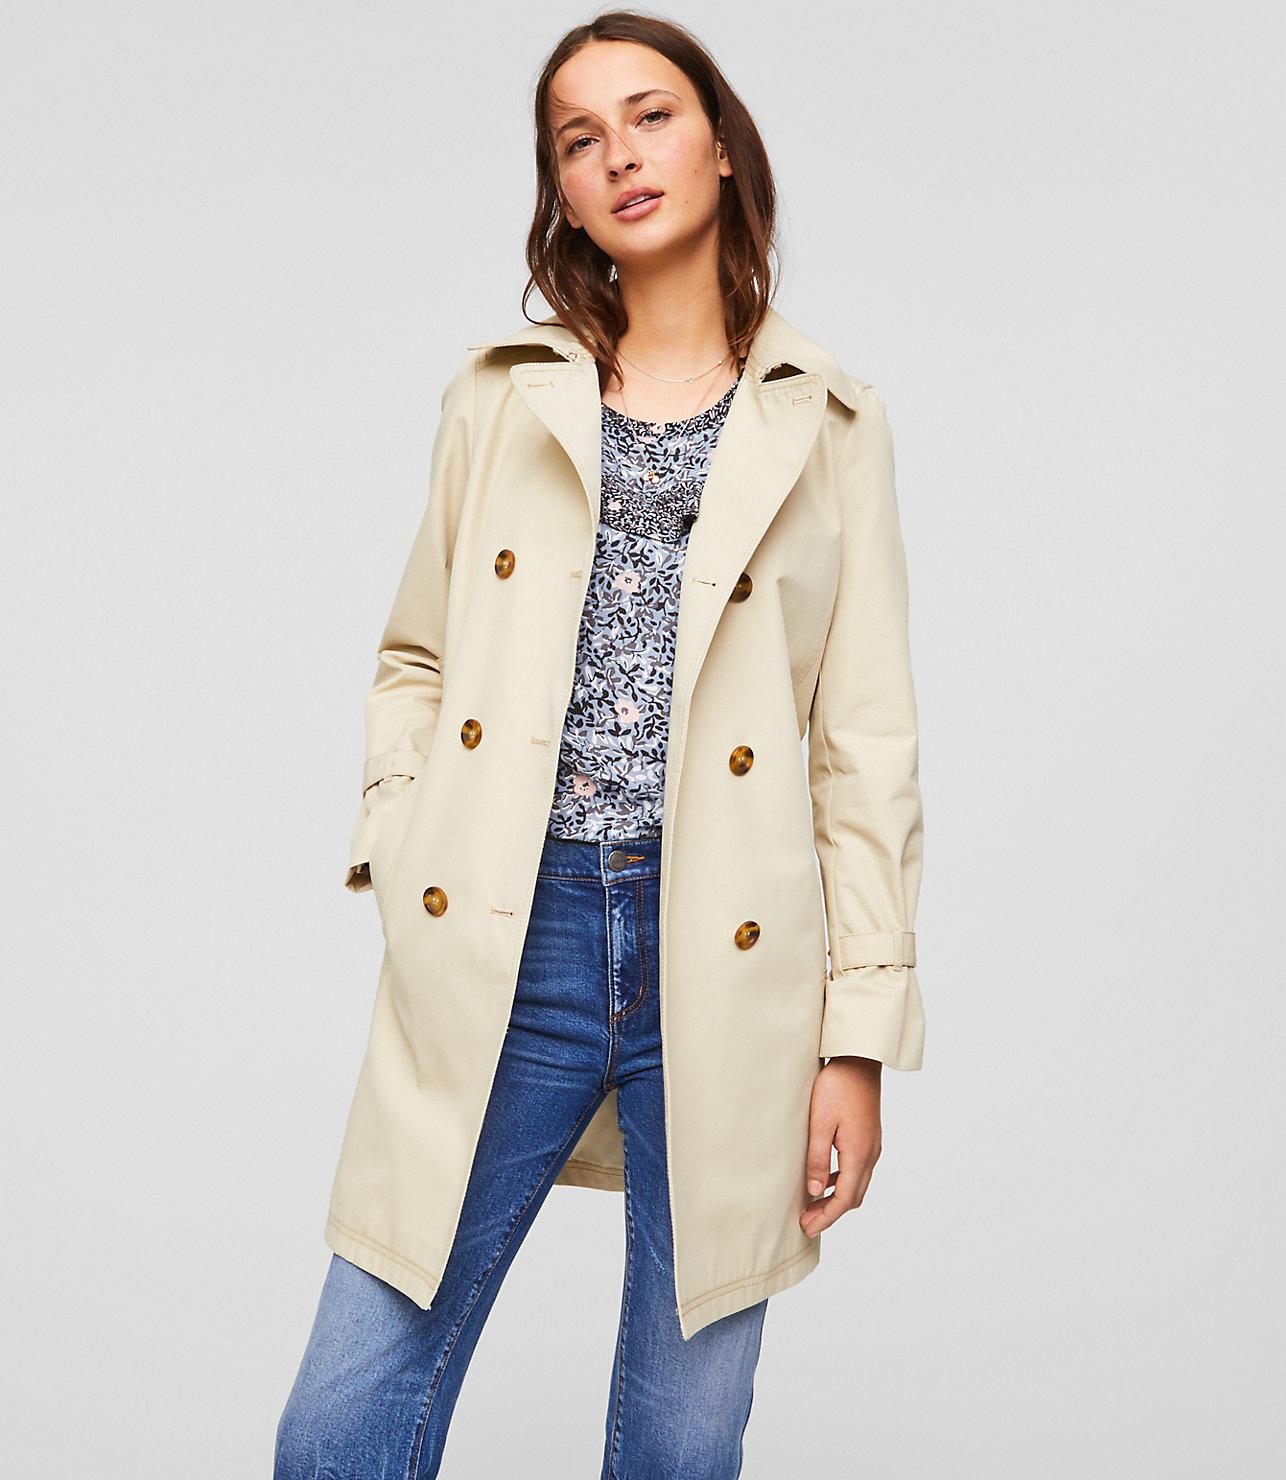 Lyst - Loft Twill Trench Coat in Natural